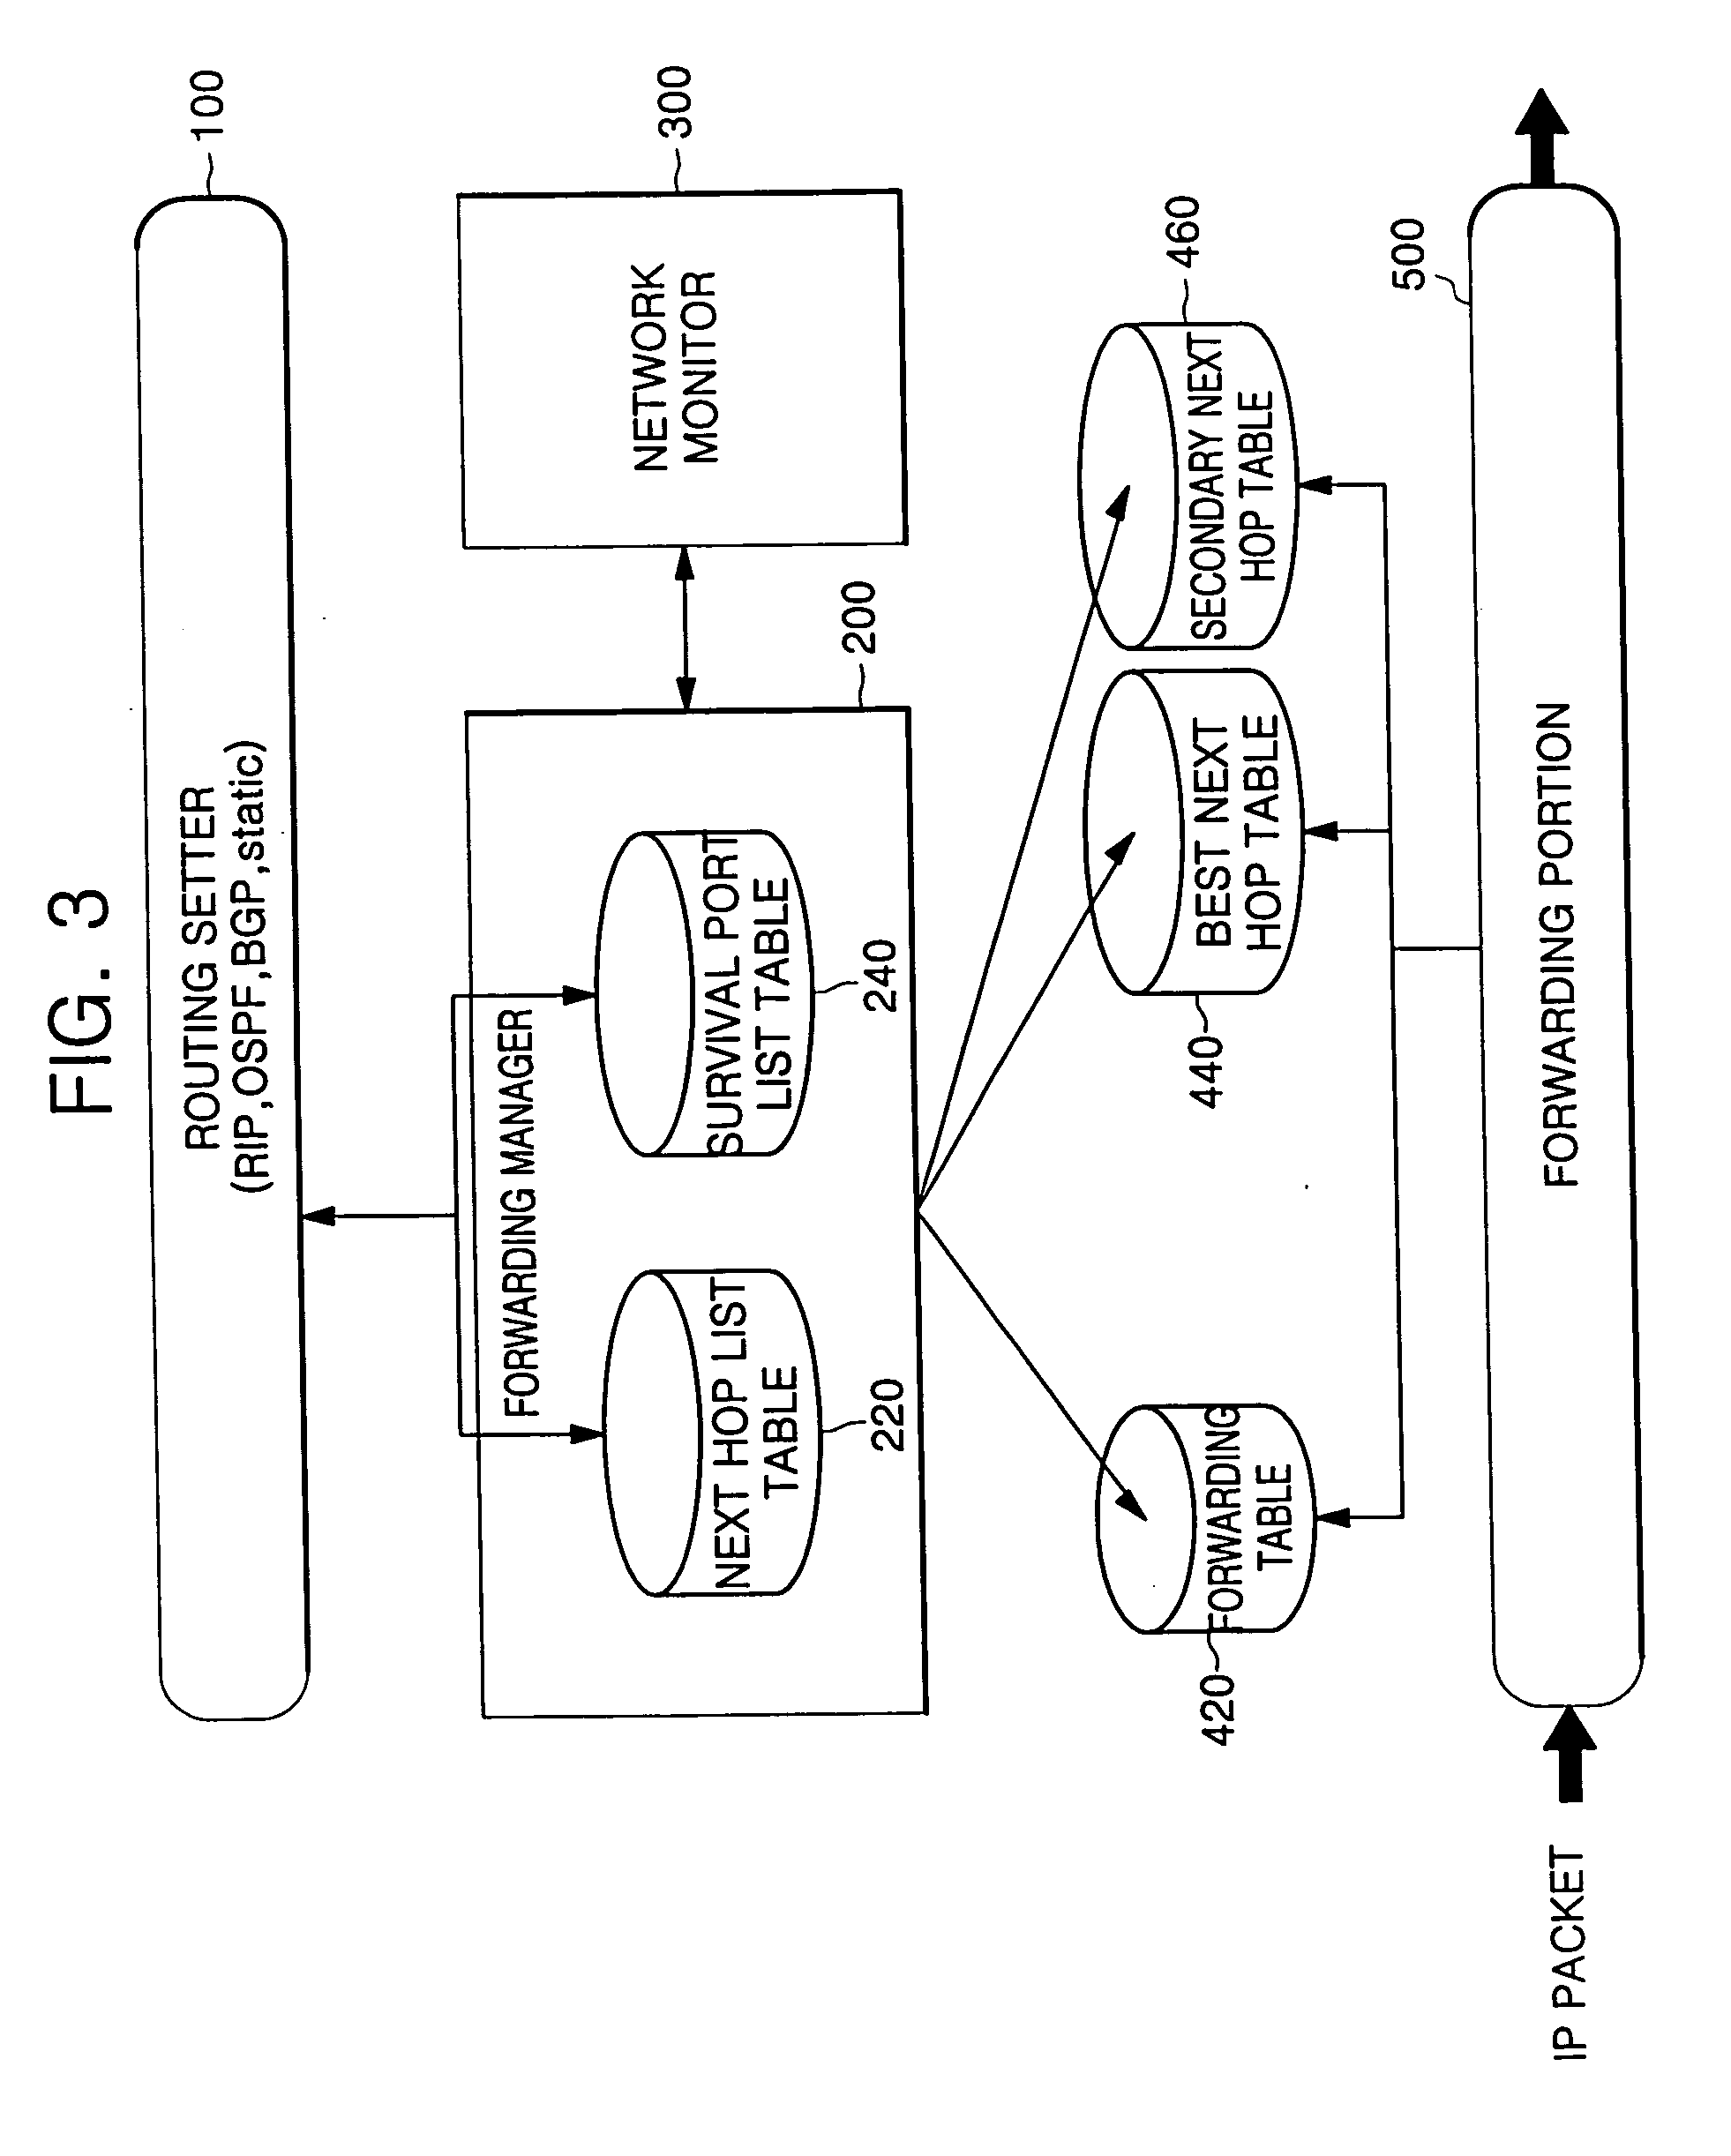 Network routing control method and apparatus